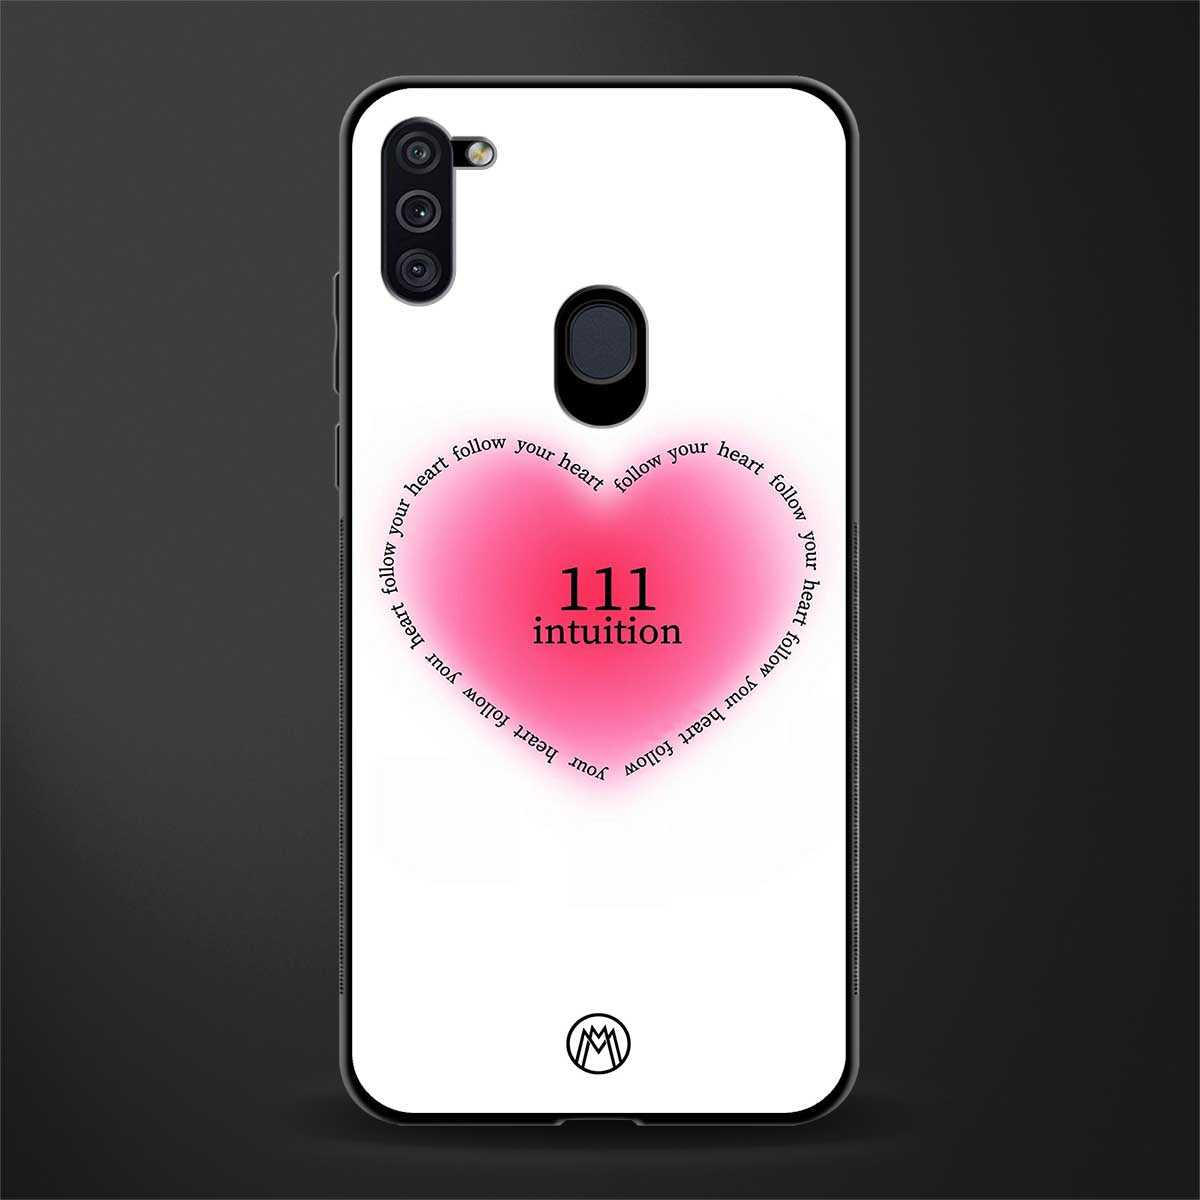 111 intuition glass case for samsung a11 image